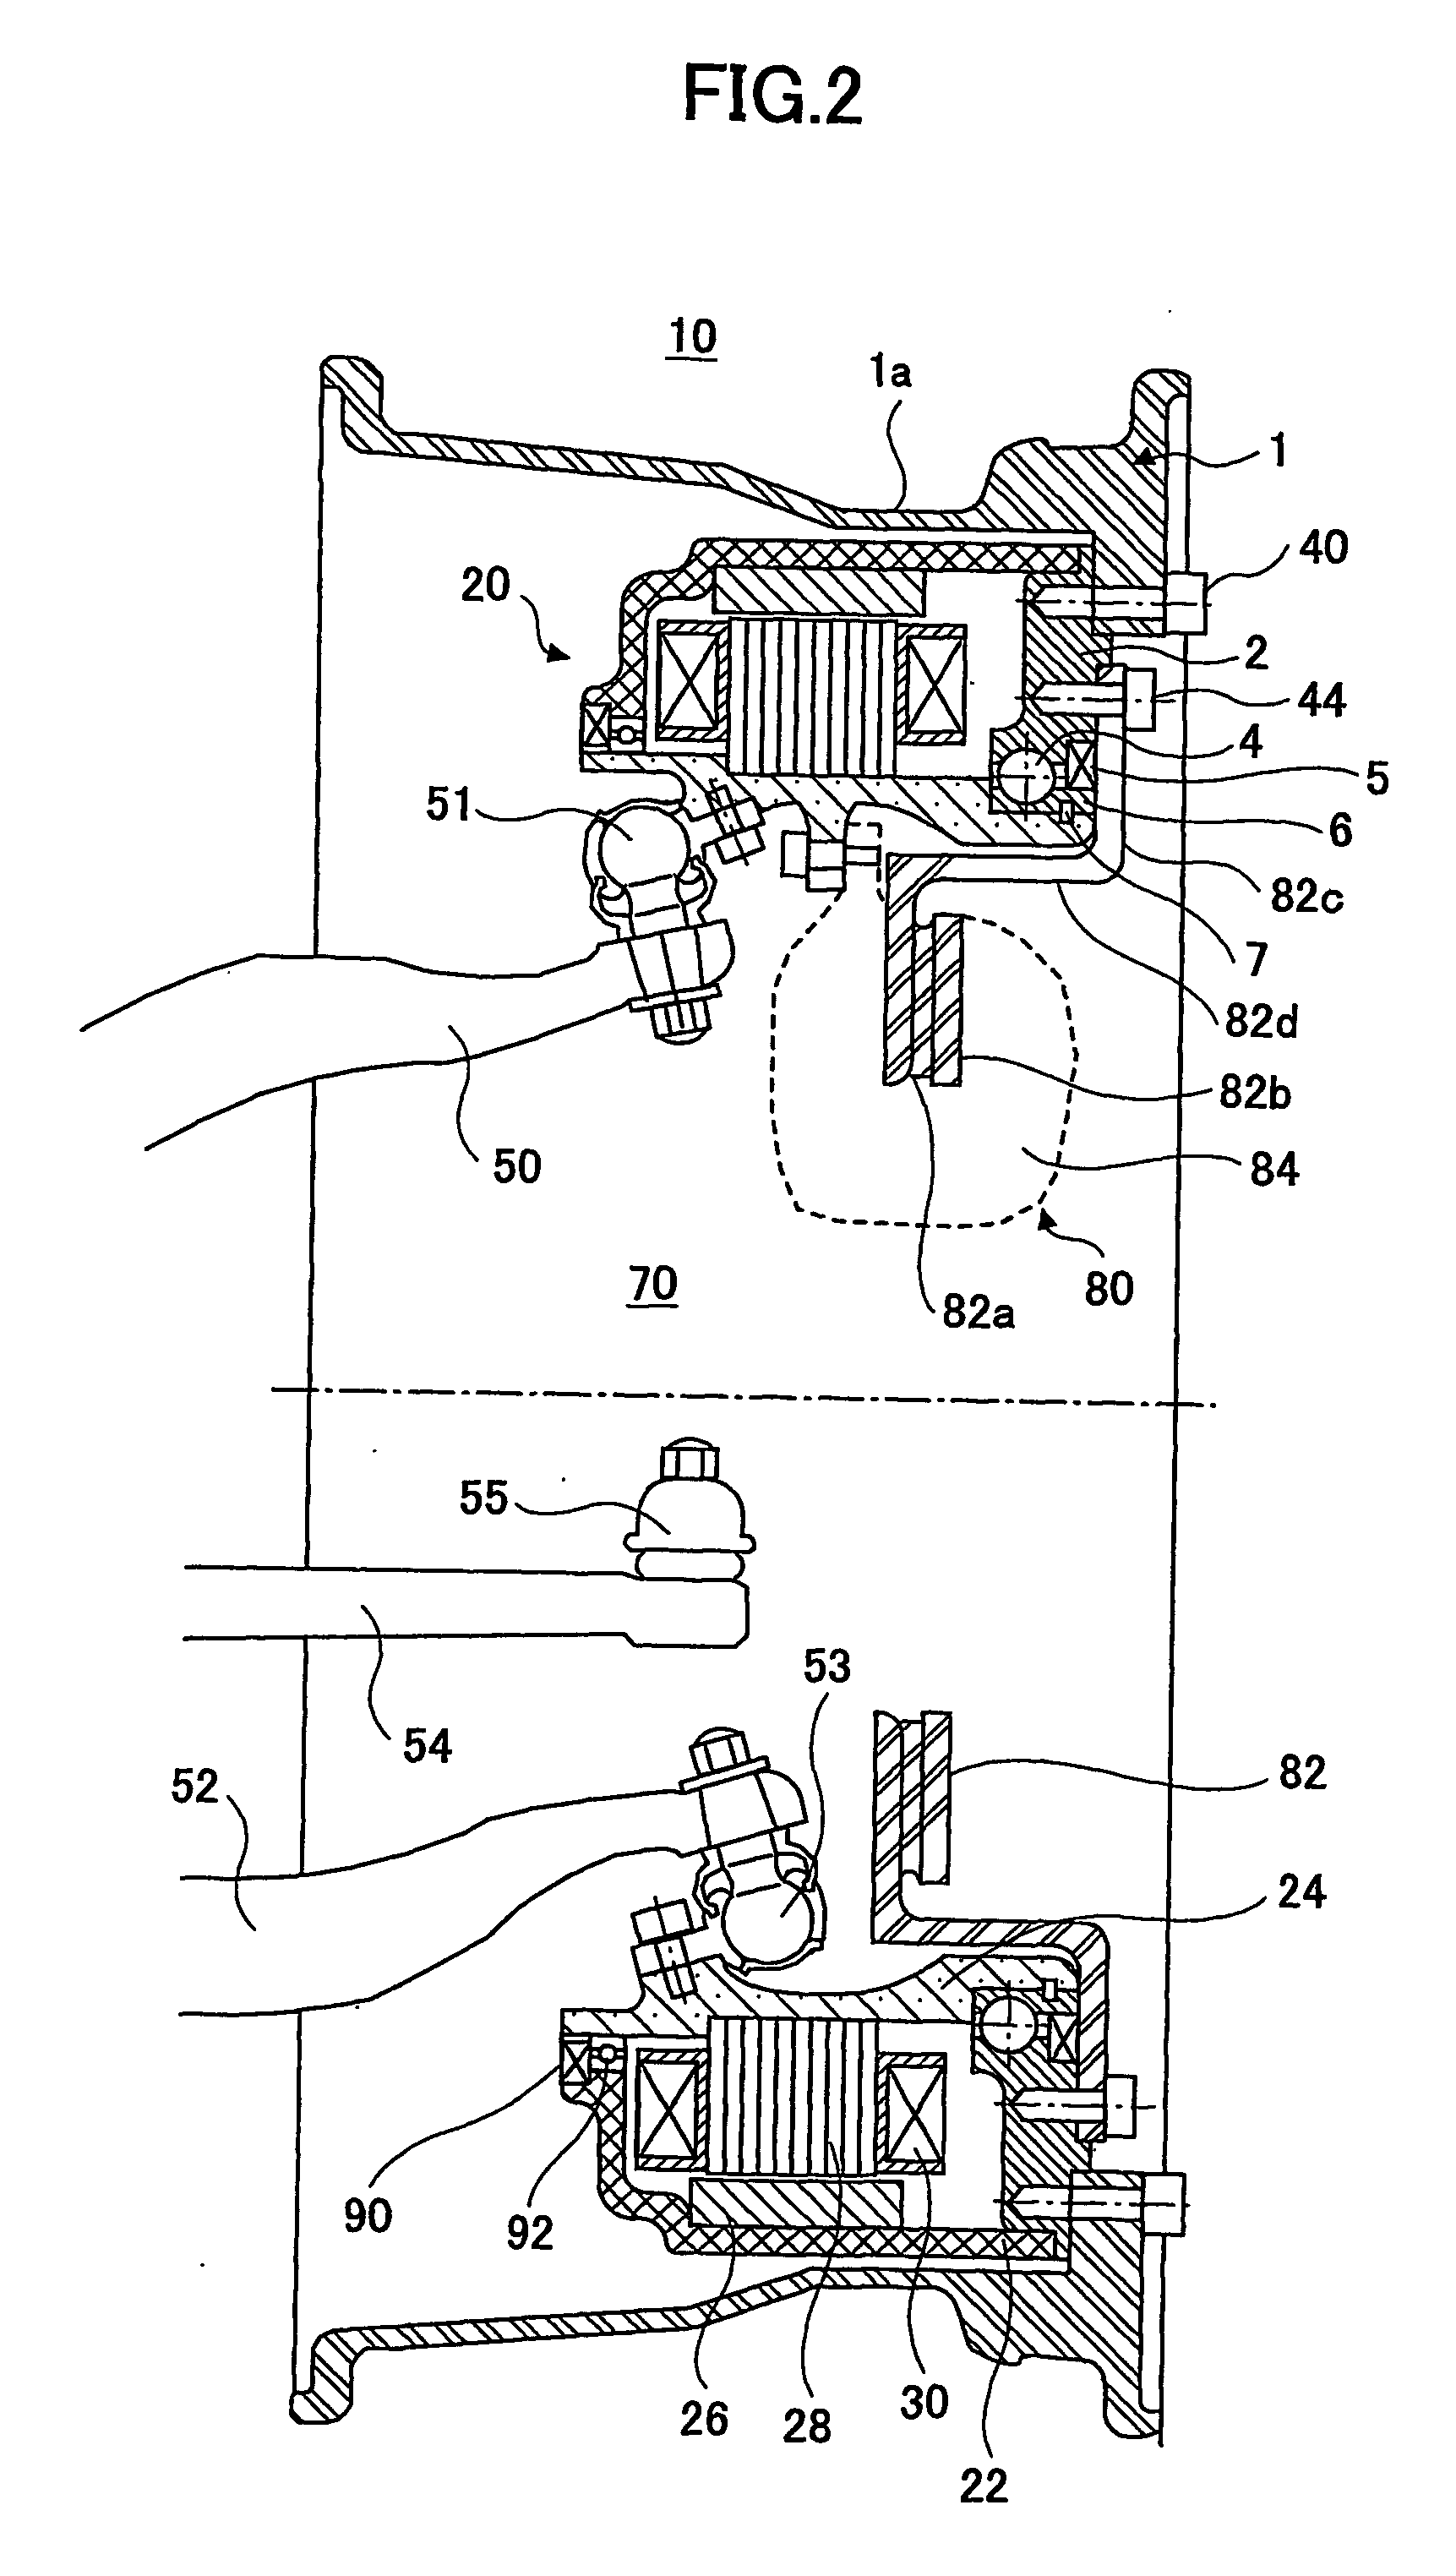 Suspension system for suspending a wheel having a motor therein